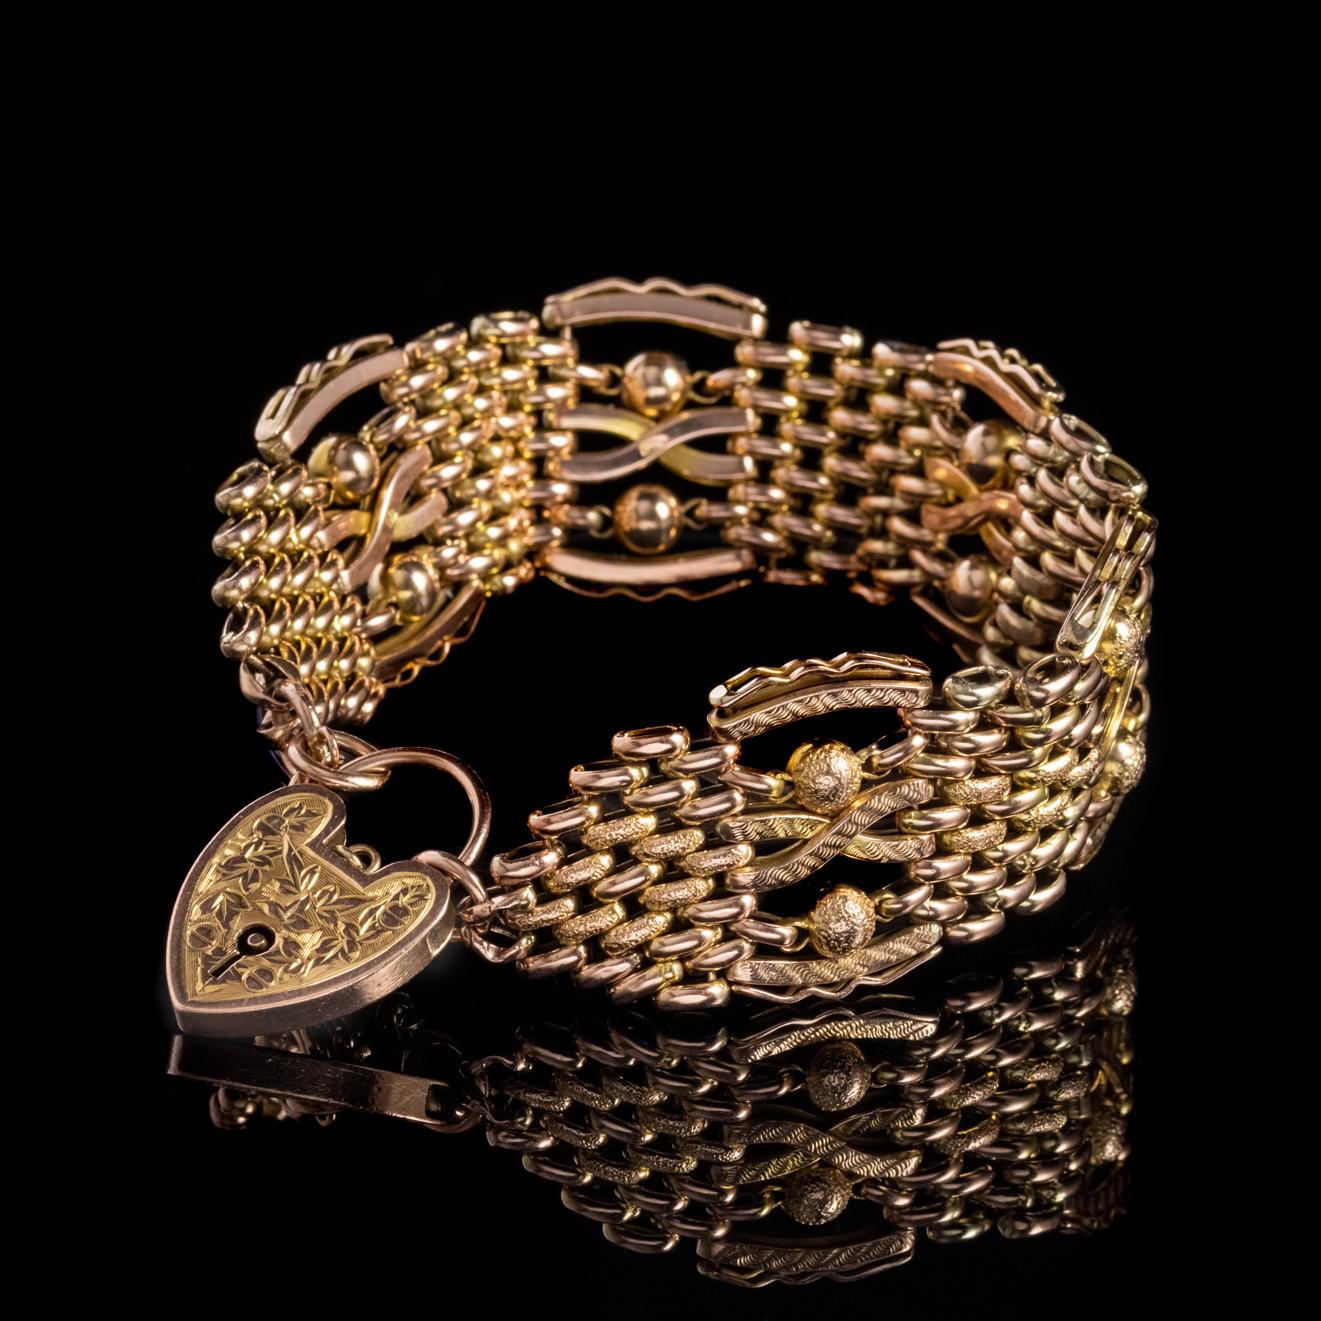 A grand Antique Victorian gate bracelet made up of fancy solid 9ct Rose Gold links with textured detailing and ornate Golden balls. 

The piece is held together by a safety chain and a wonderful solid Gold heart padlock engraved with Ivy on the